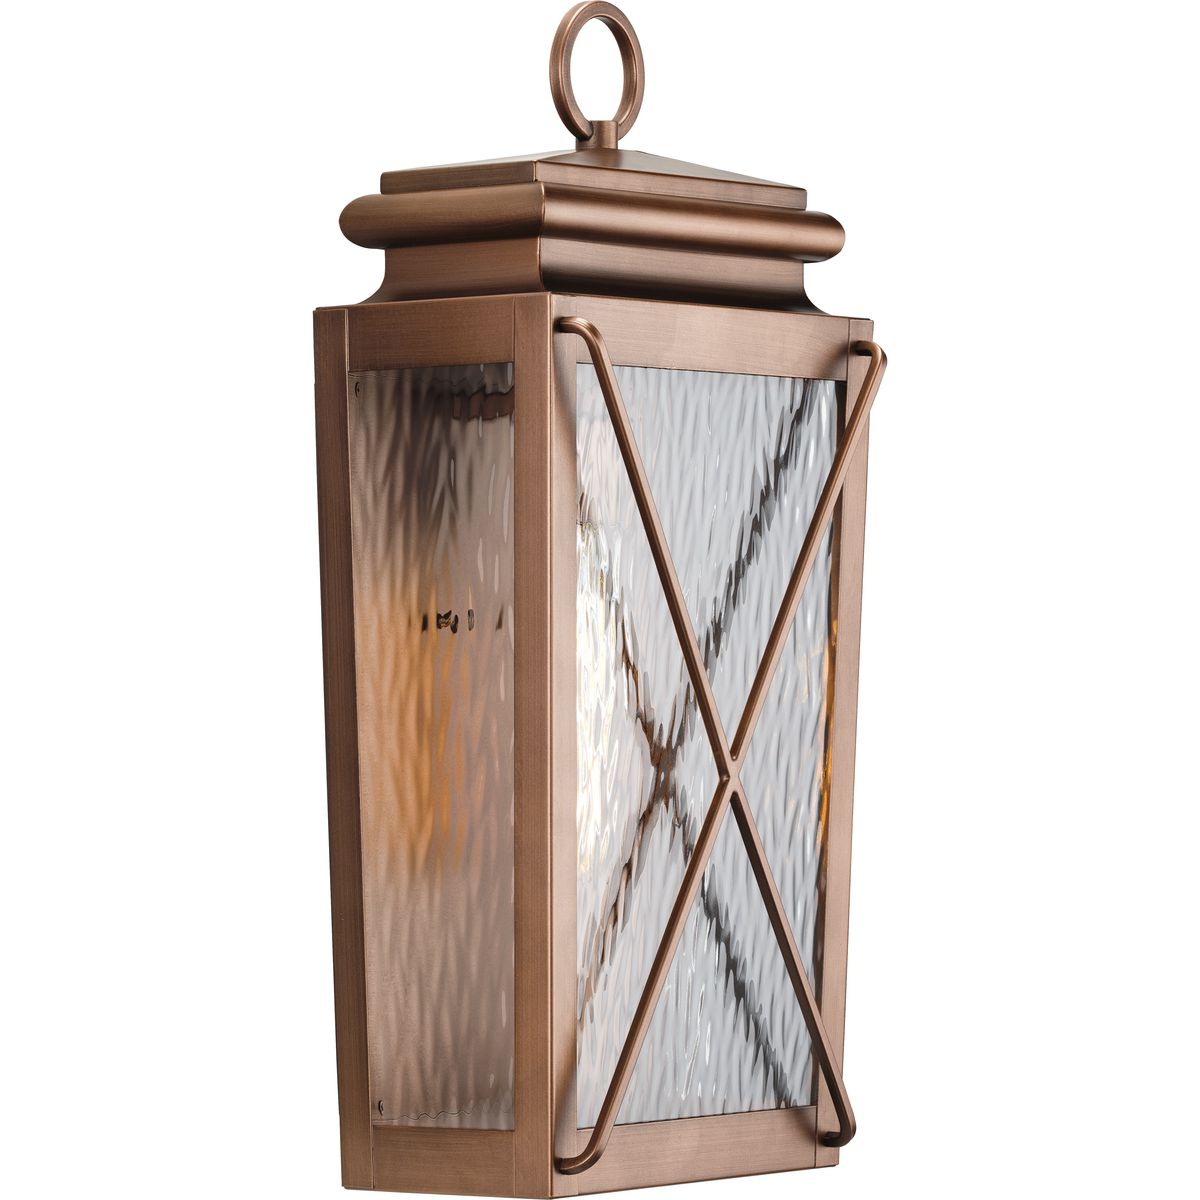 Wakeford Collection One-Light Antique Copper and Clear Water Glass Transitional Style Medium Outdoor Wall Lantern - Wet Location Listed